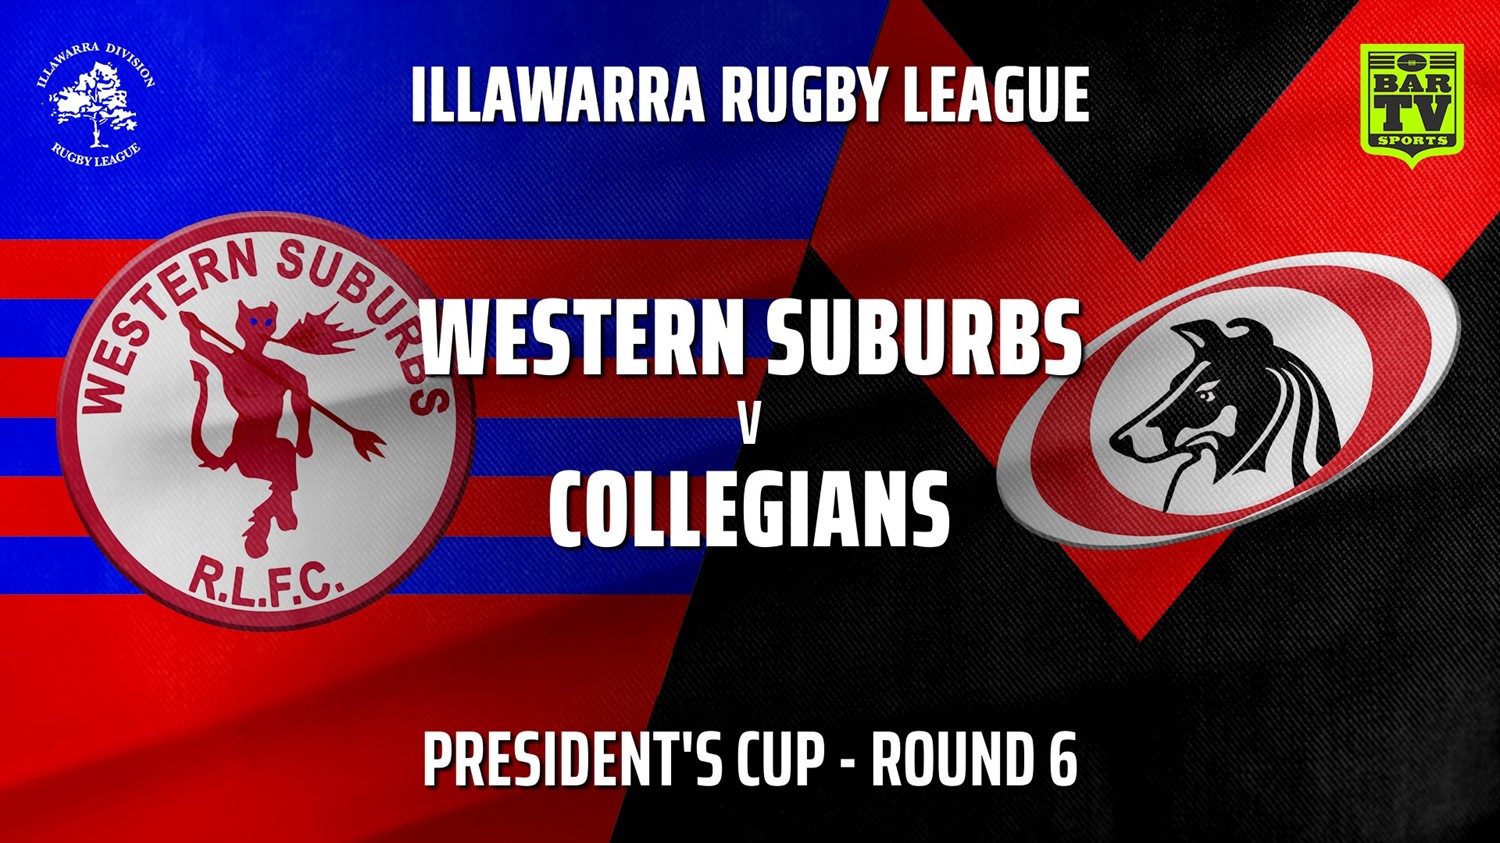 210522-IRL Round 6 - President's Cup - Western Suburbs Devils v Collegians Minigame Slate Image